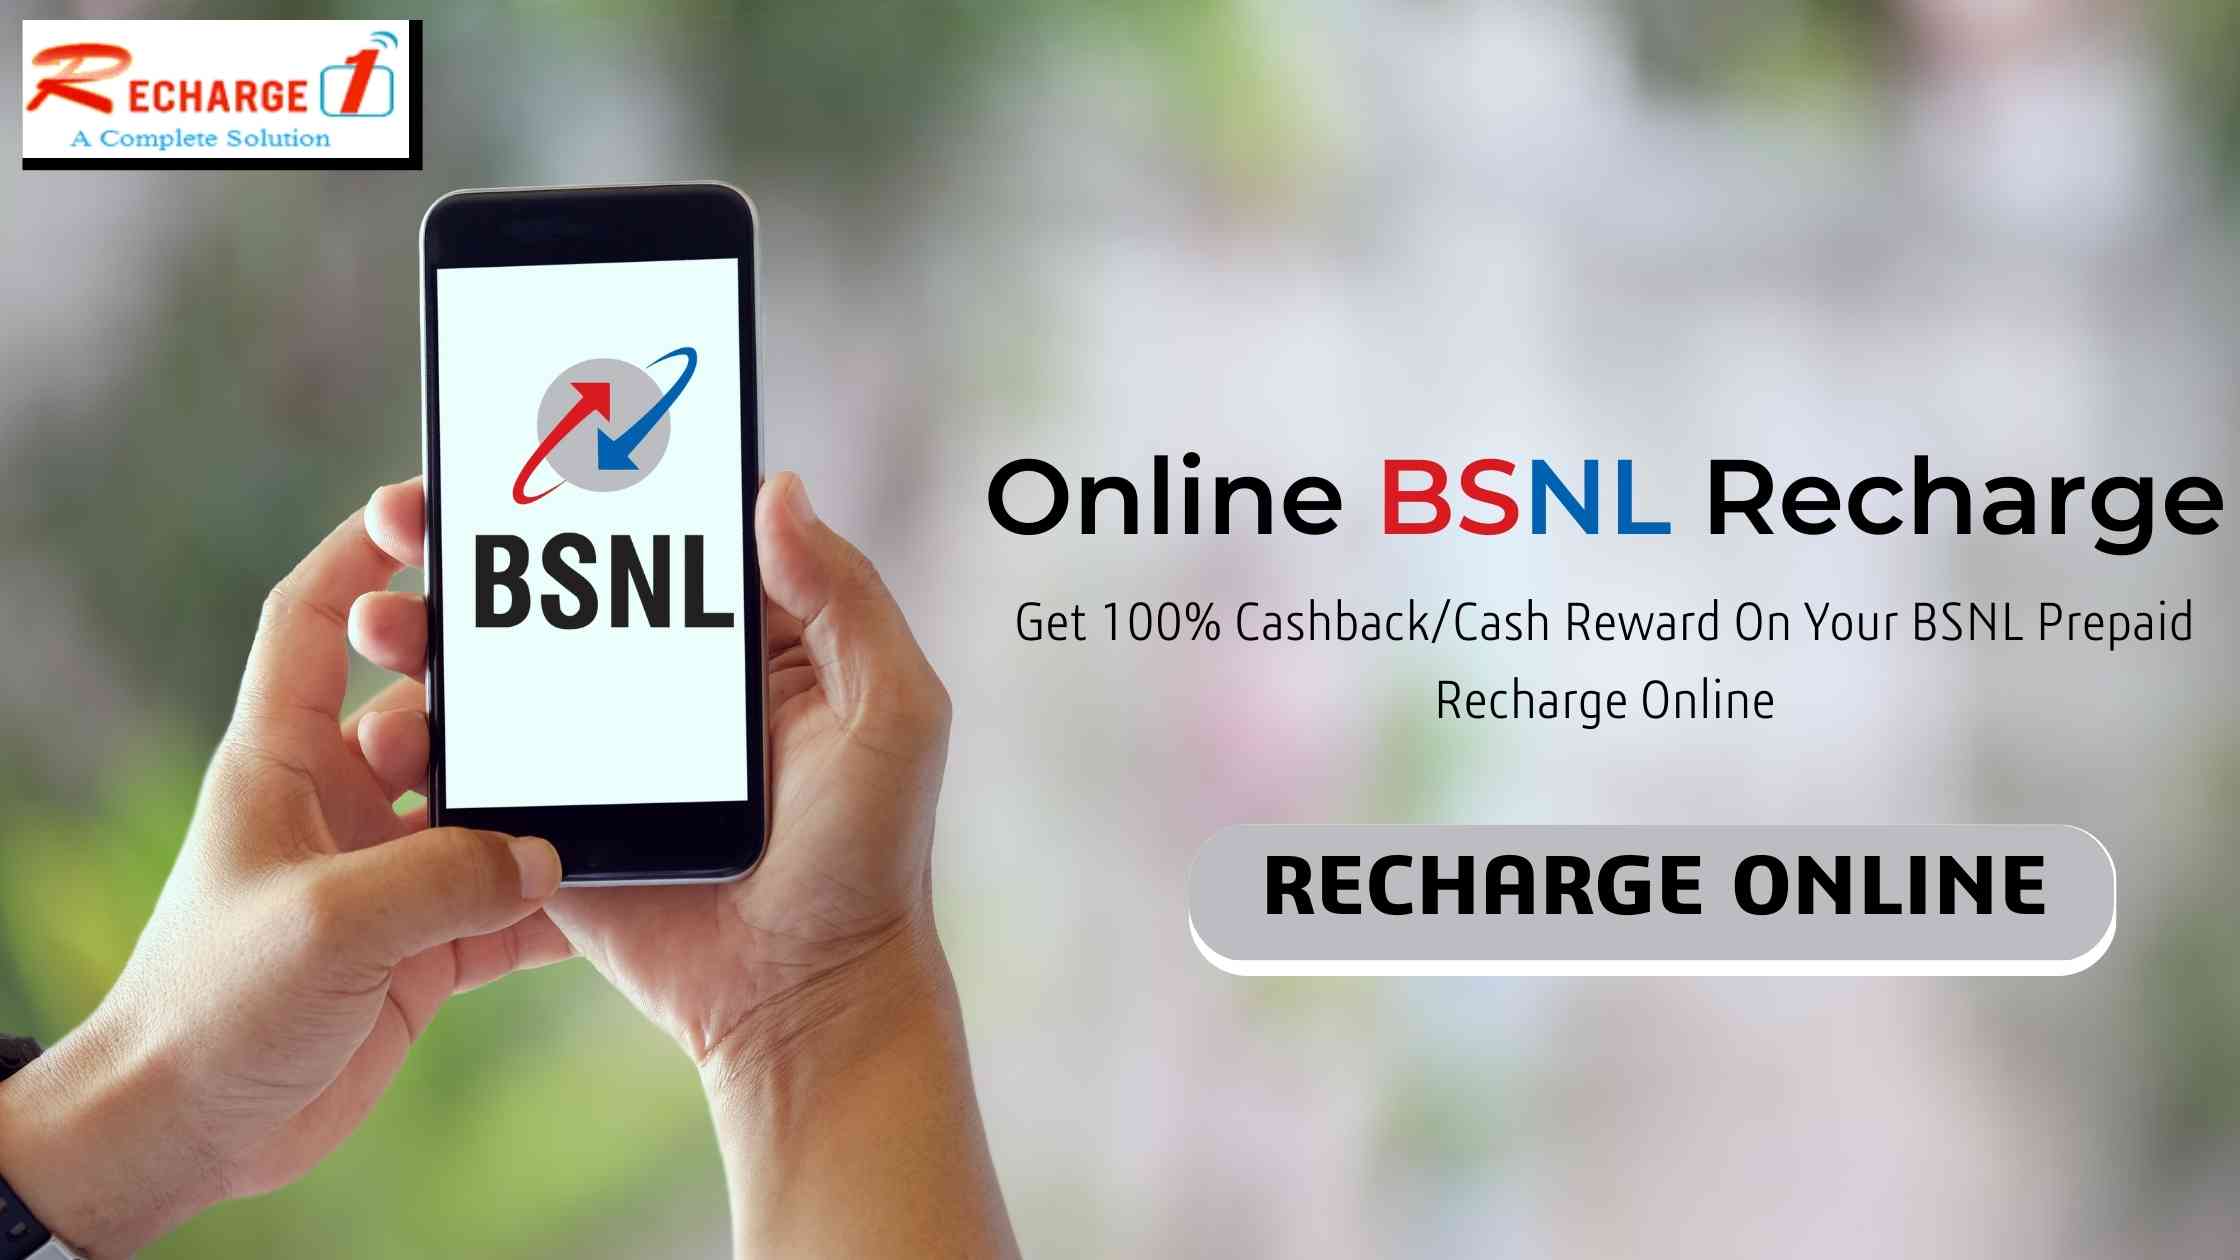 Online BSNL RechargeServicesBusiness OffersAll Indiaother